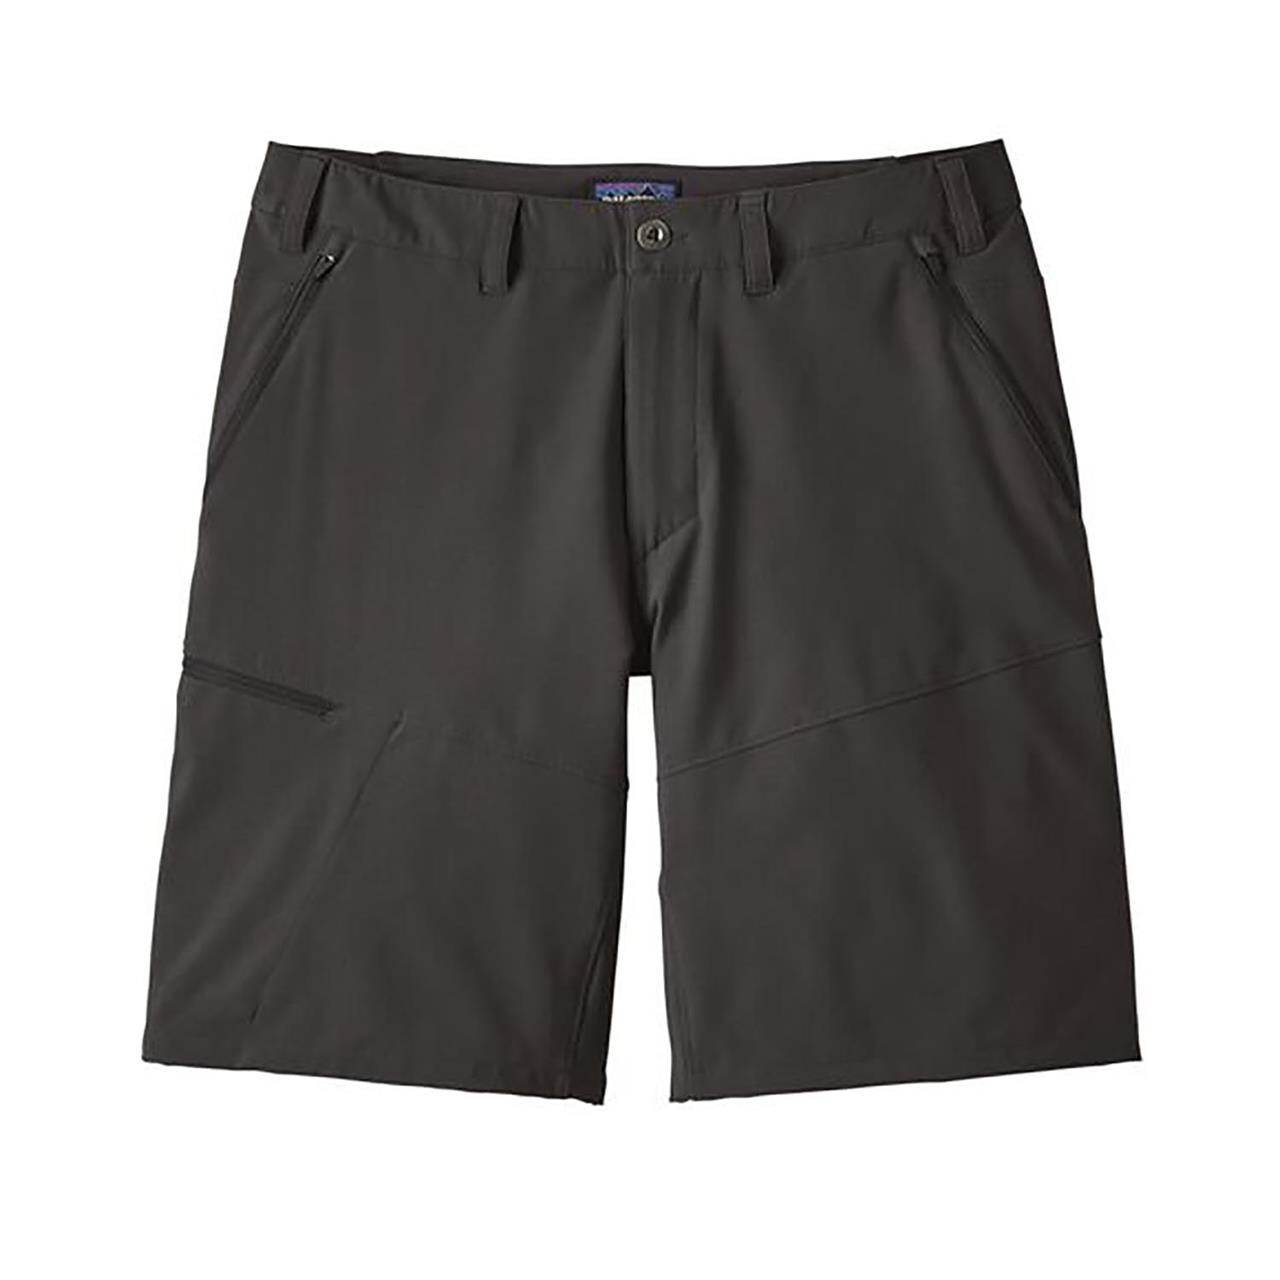 #2 - Patagonia Mens Terravia Trail Shorts - 10" (Brun (TREE RING BROWN) W36 tommer)